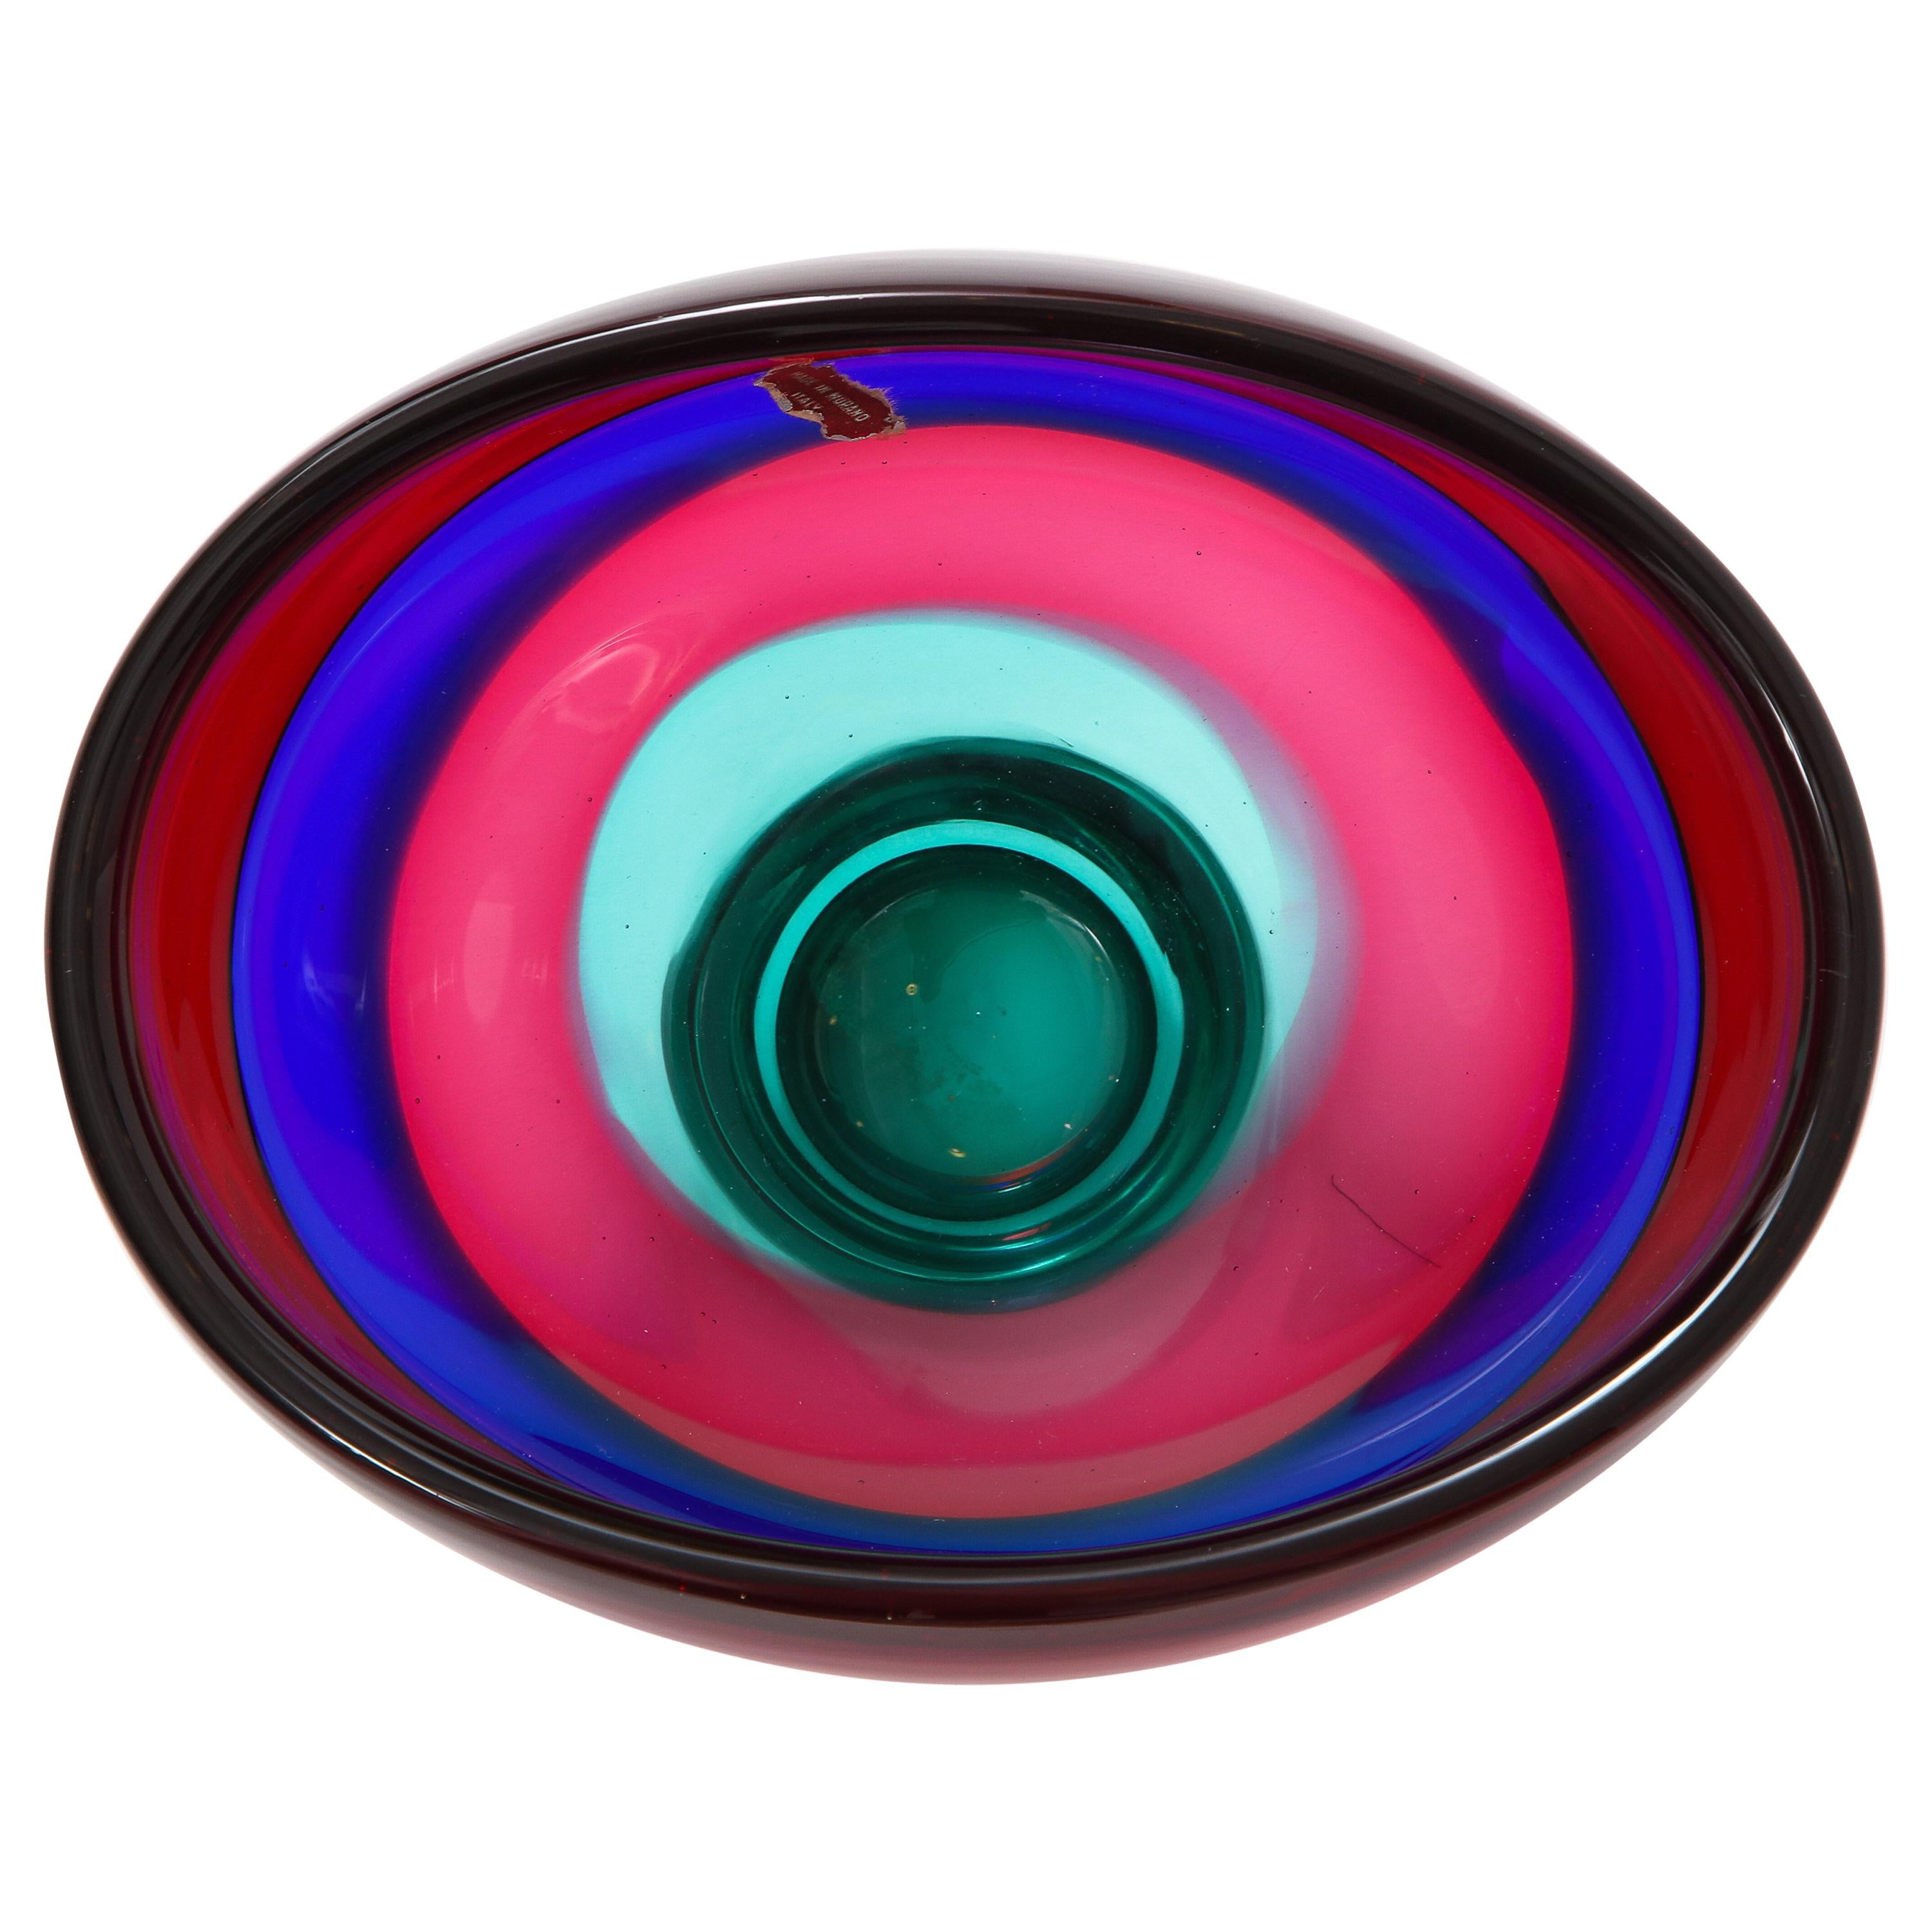 Vibrant red blue and green Murano glass bowl by Fluvio Bianconi.
Bearing the sticker: Murano made in Italy.
  